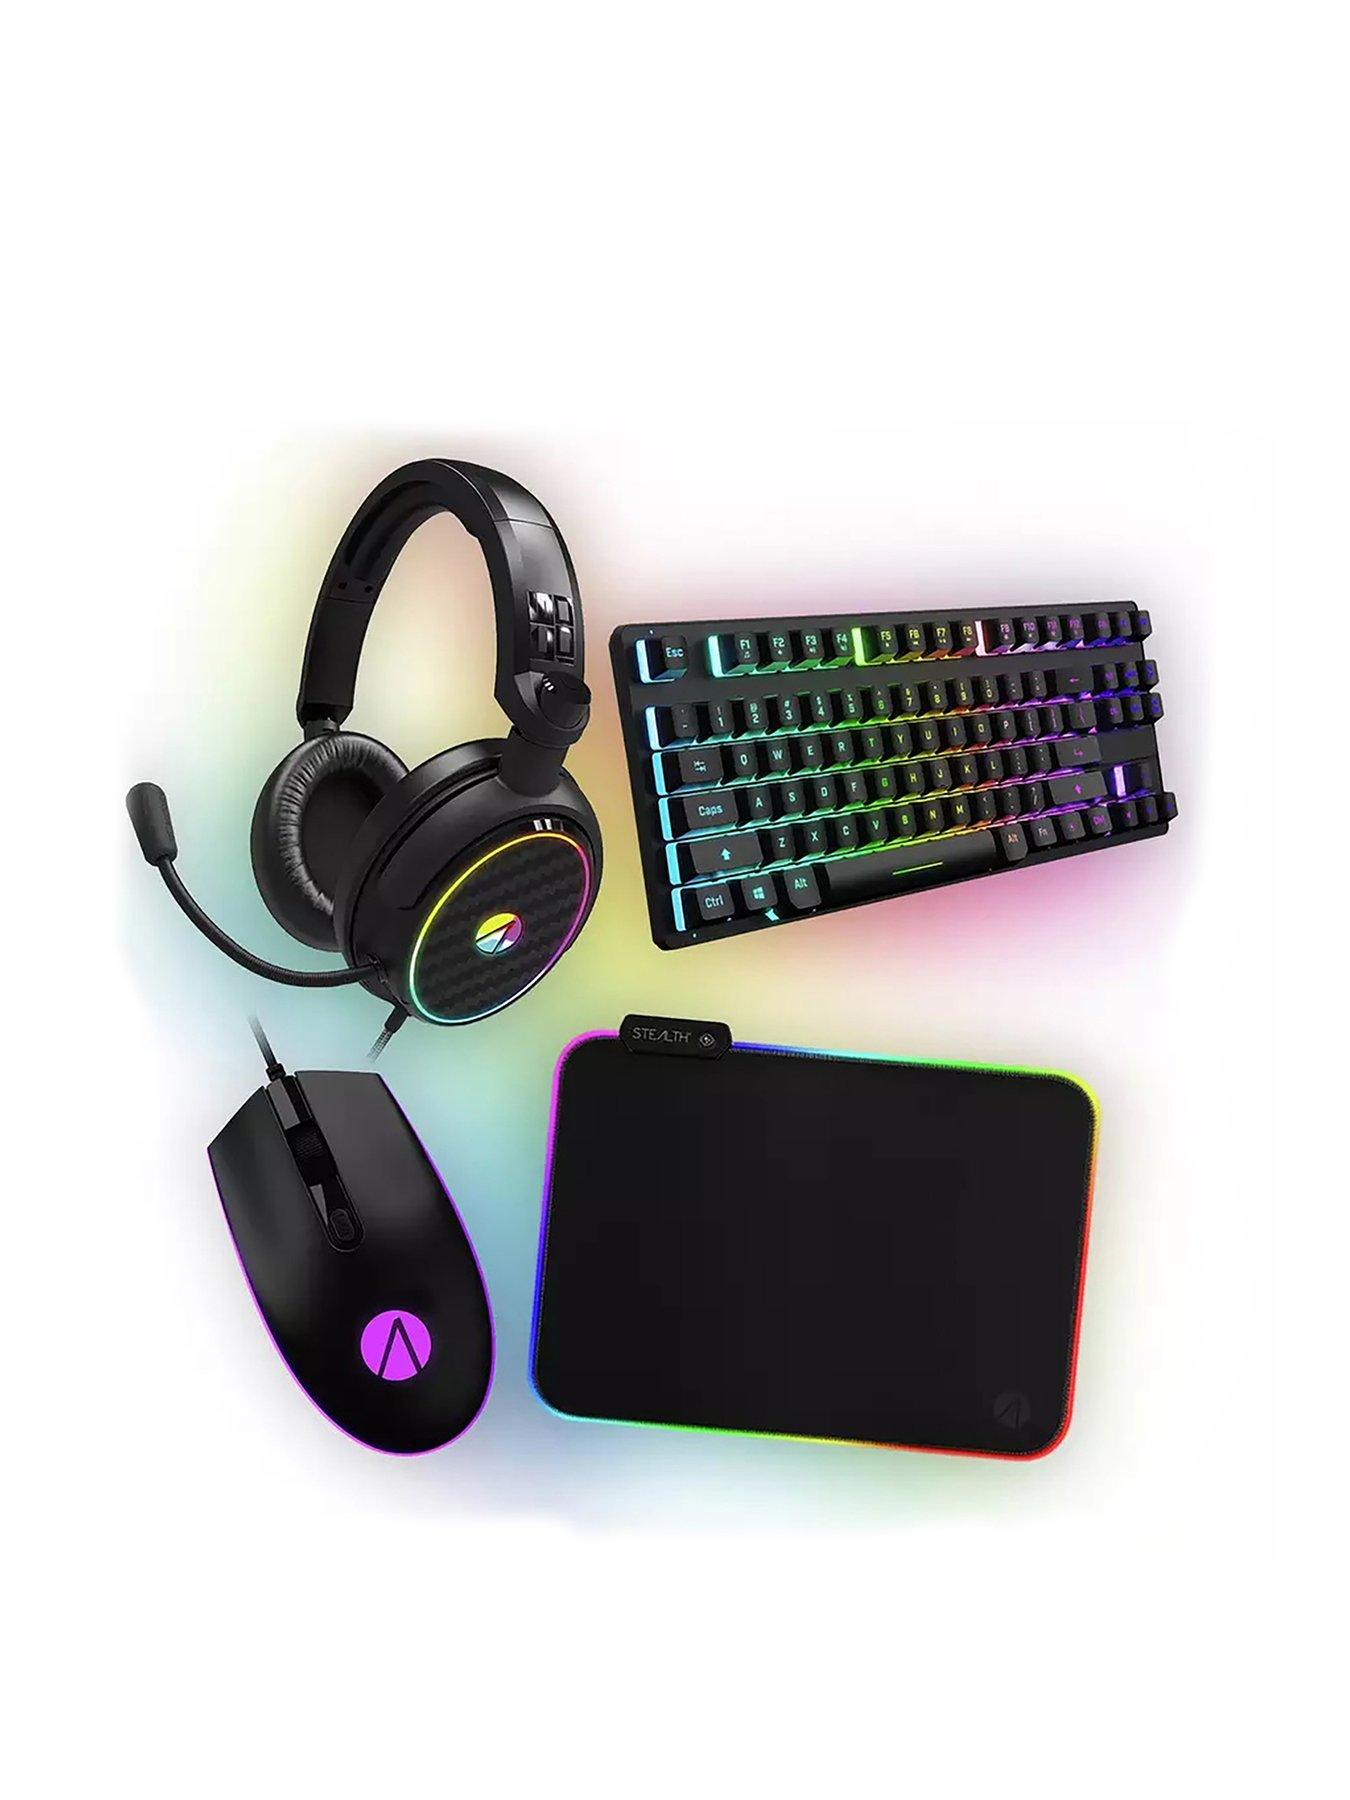 - Stealth Gaming LED Pad, Bundle Headset C6-100 Mouse, 4-in-1 Keyboard, Mouse Up Gaming Light